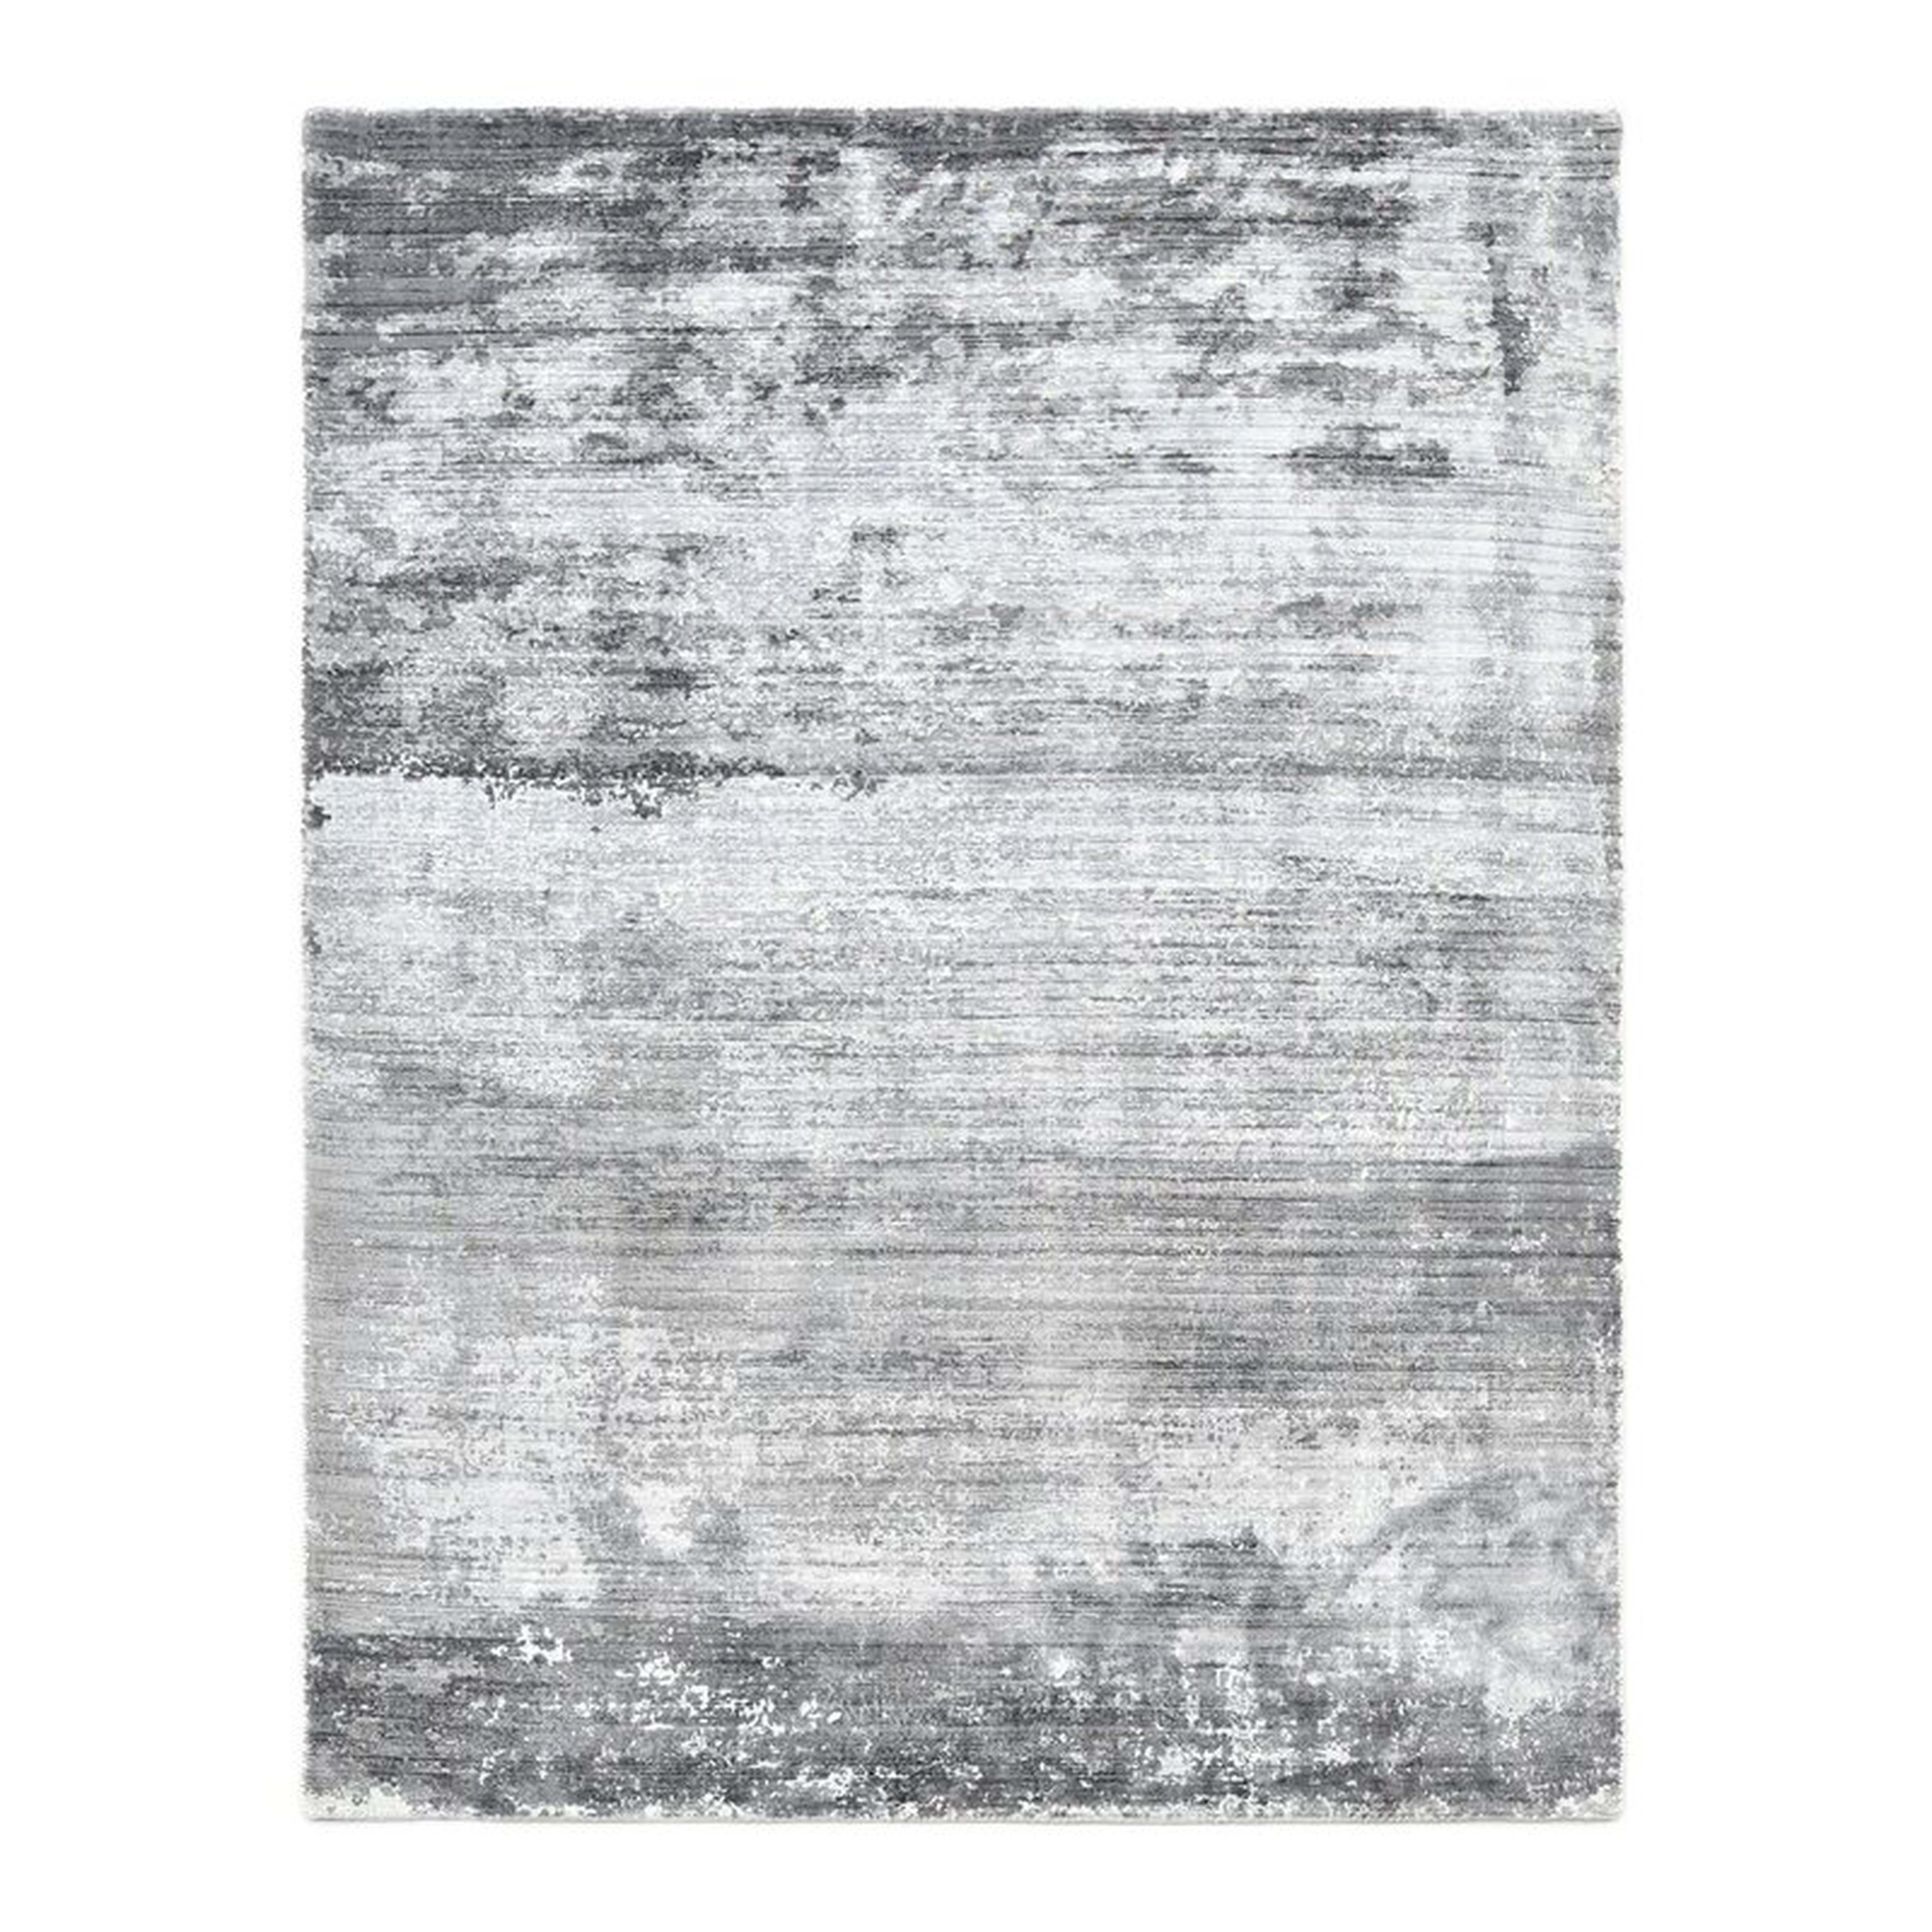 Solo Rugs Ira Abstract Gray Area Rug Rug Size: Rectangle 8' W x 10' L - Perigold